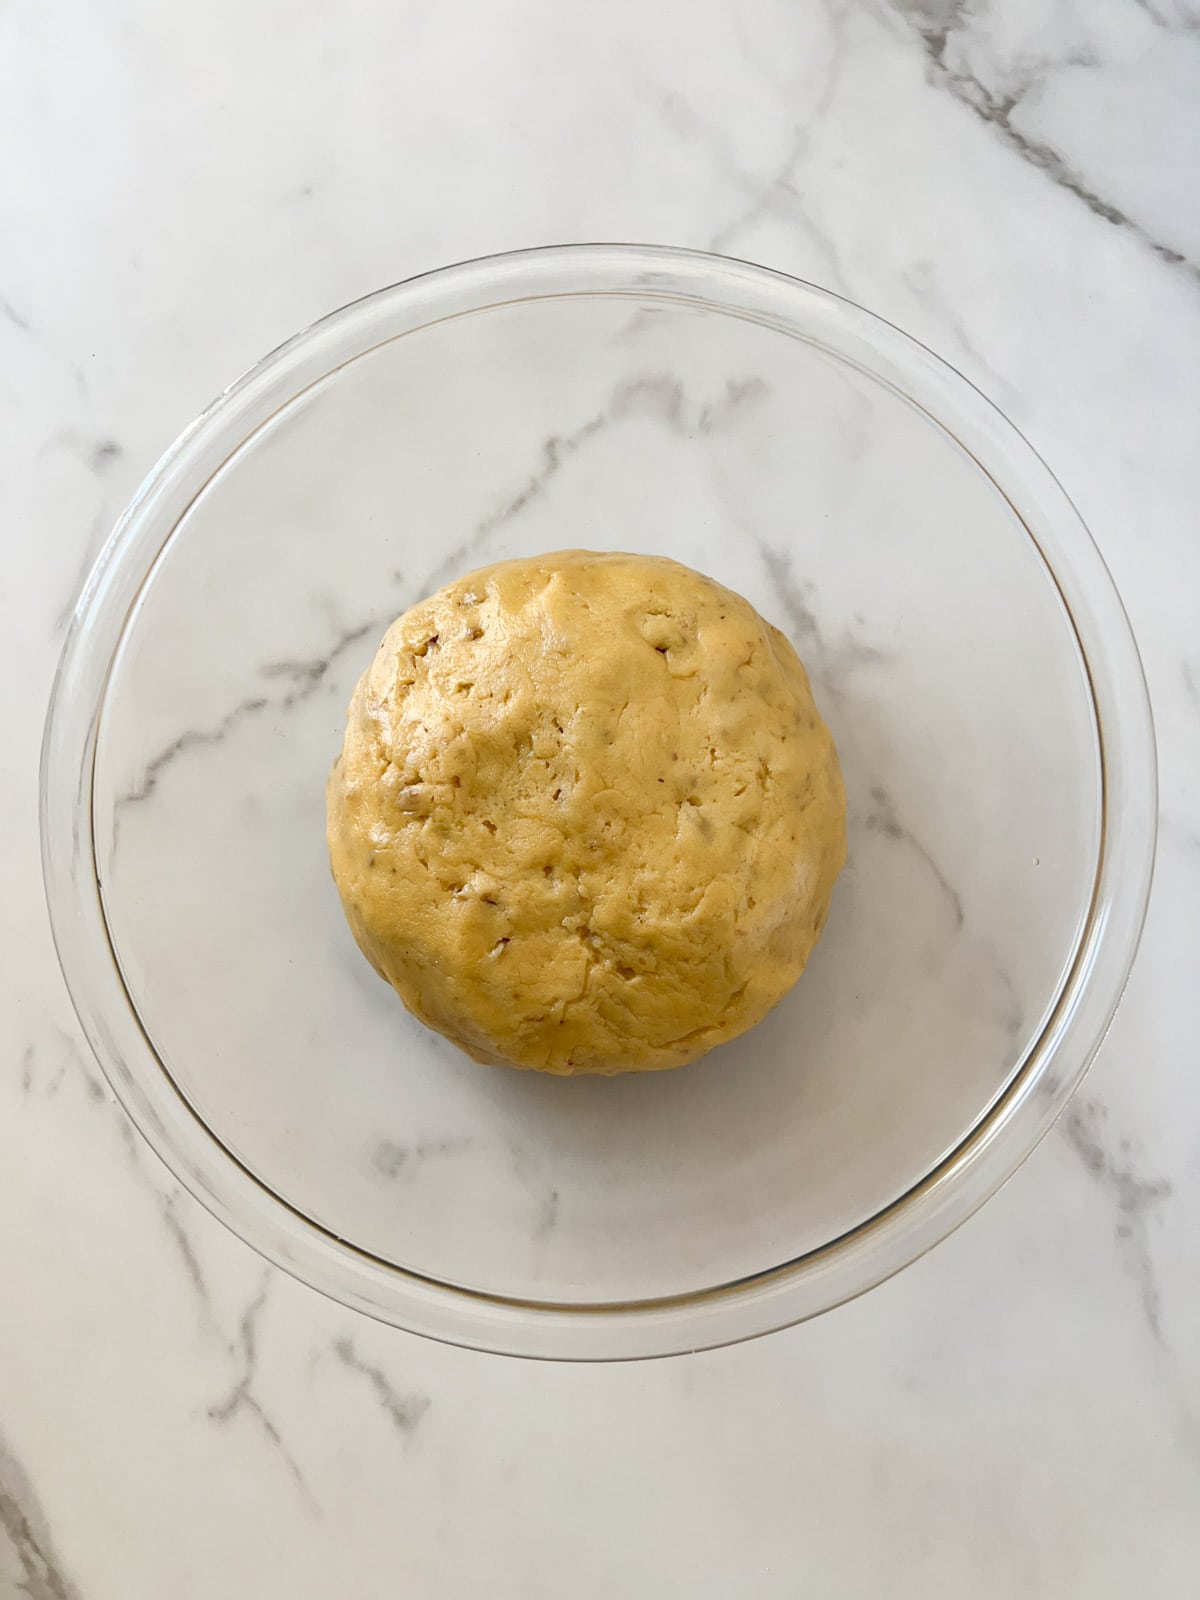 A large glass bowl with a ball of biscotti dough placed on a marble countertop.